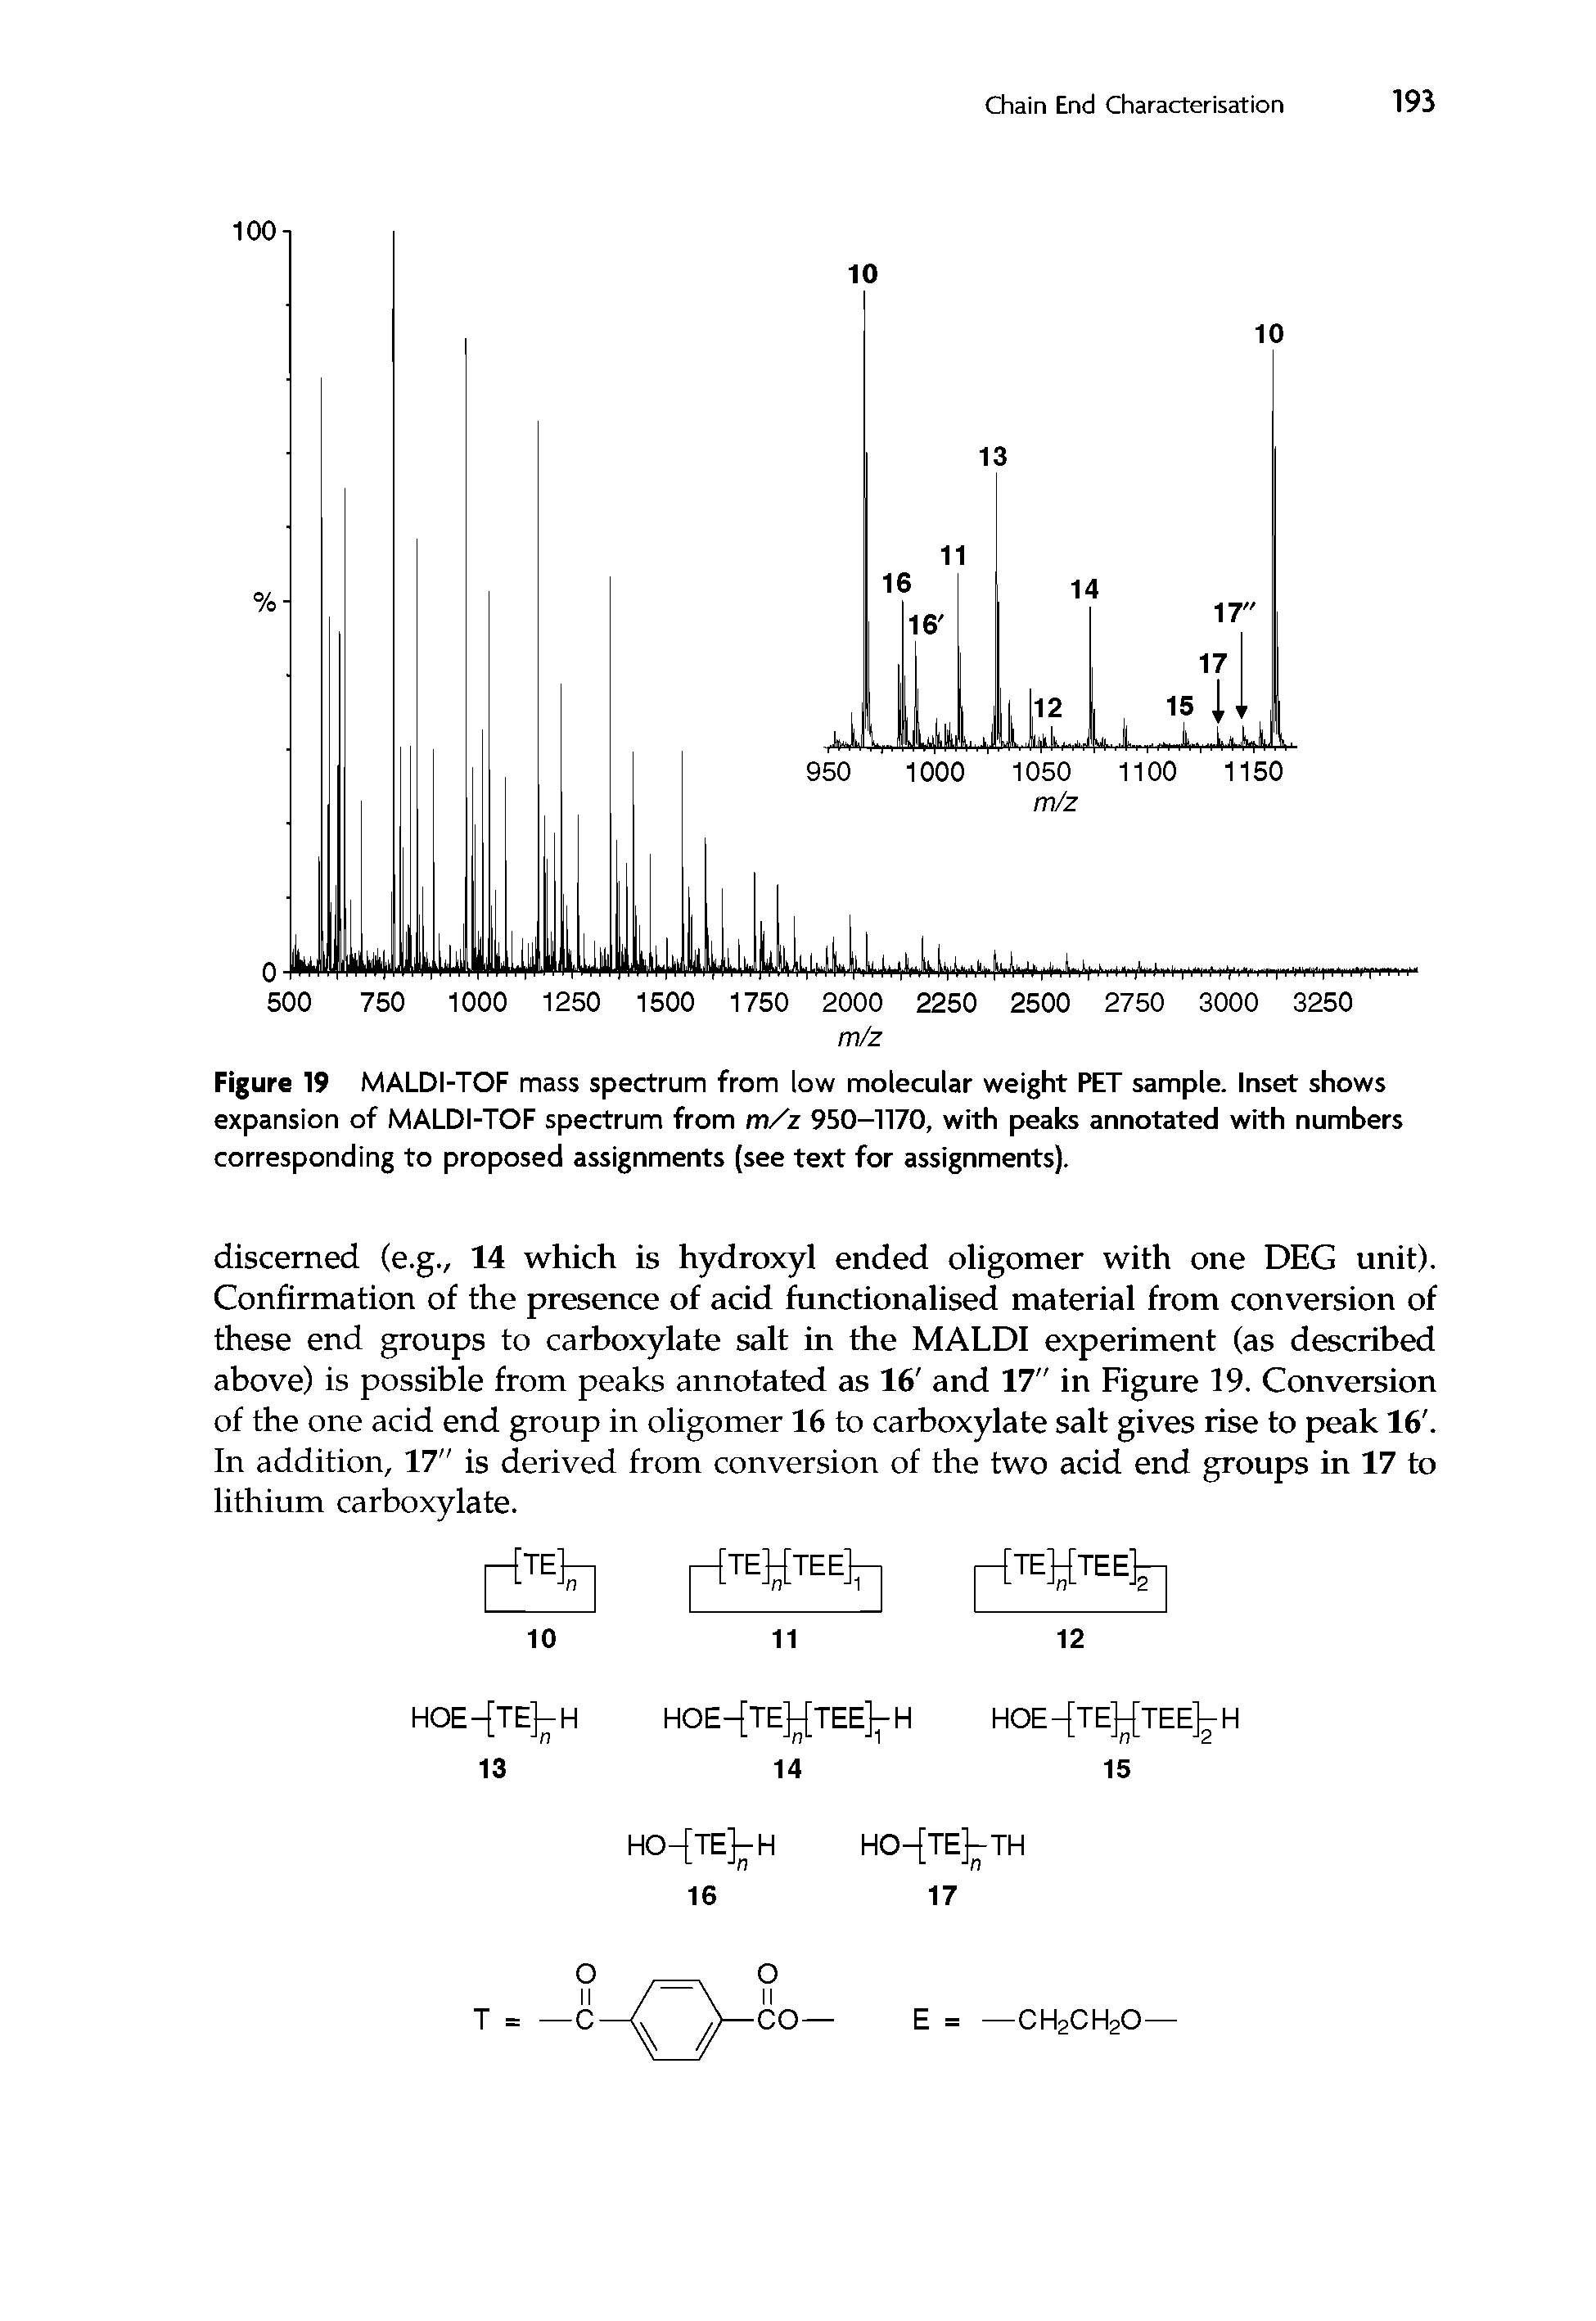 Figure 19 MALDI-TOF mass spectrum from low molecular weight PET sample. Inset shows expansion of MALDI-TOF spectrum from m/z 950-1170, with peaks annotated with numbers corresponding to proposed assignments (see text for assignments).